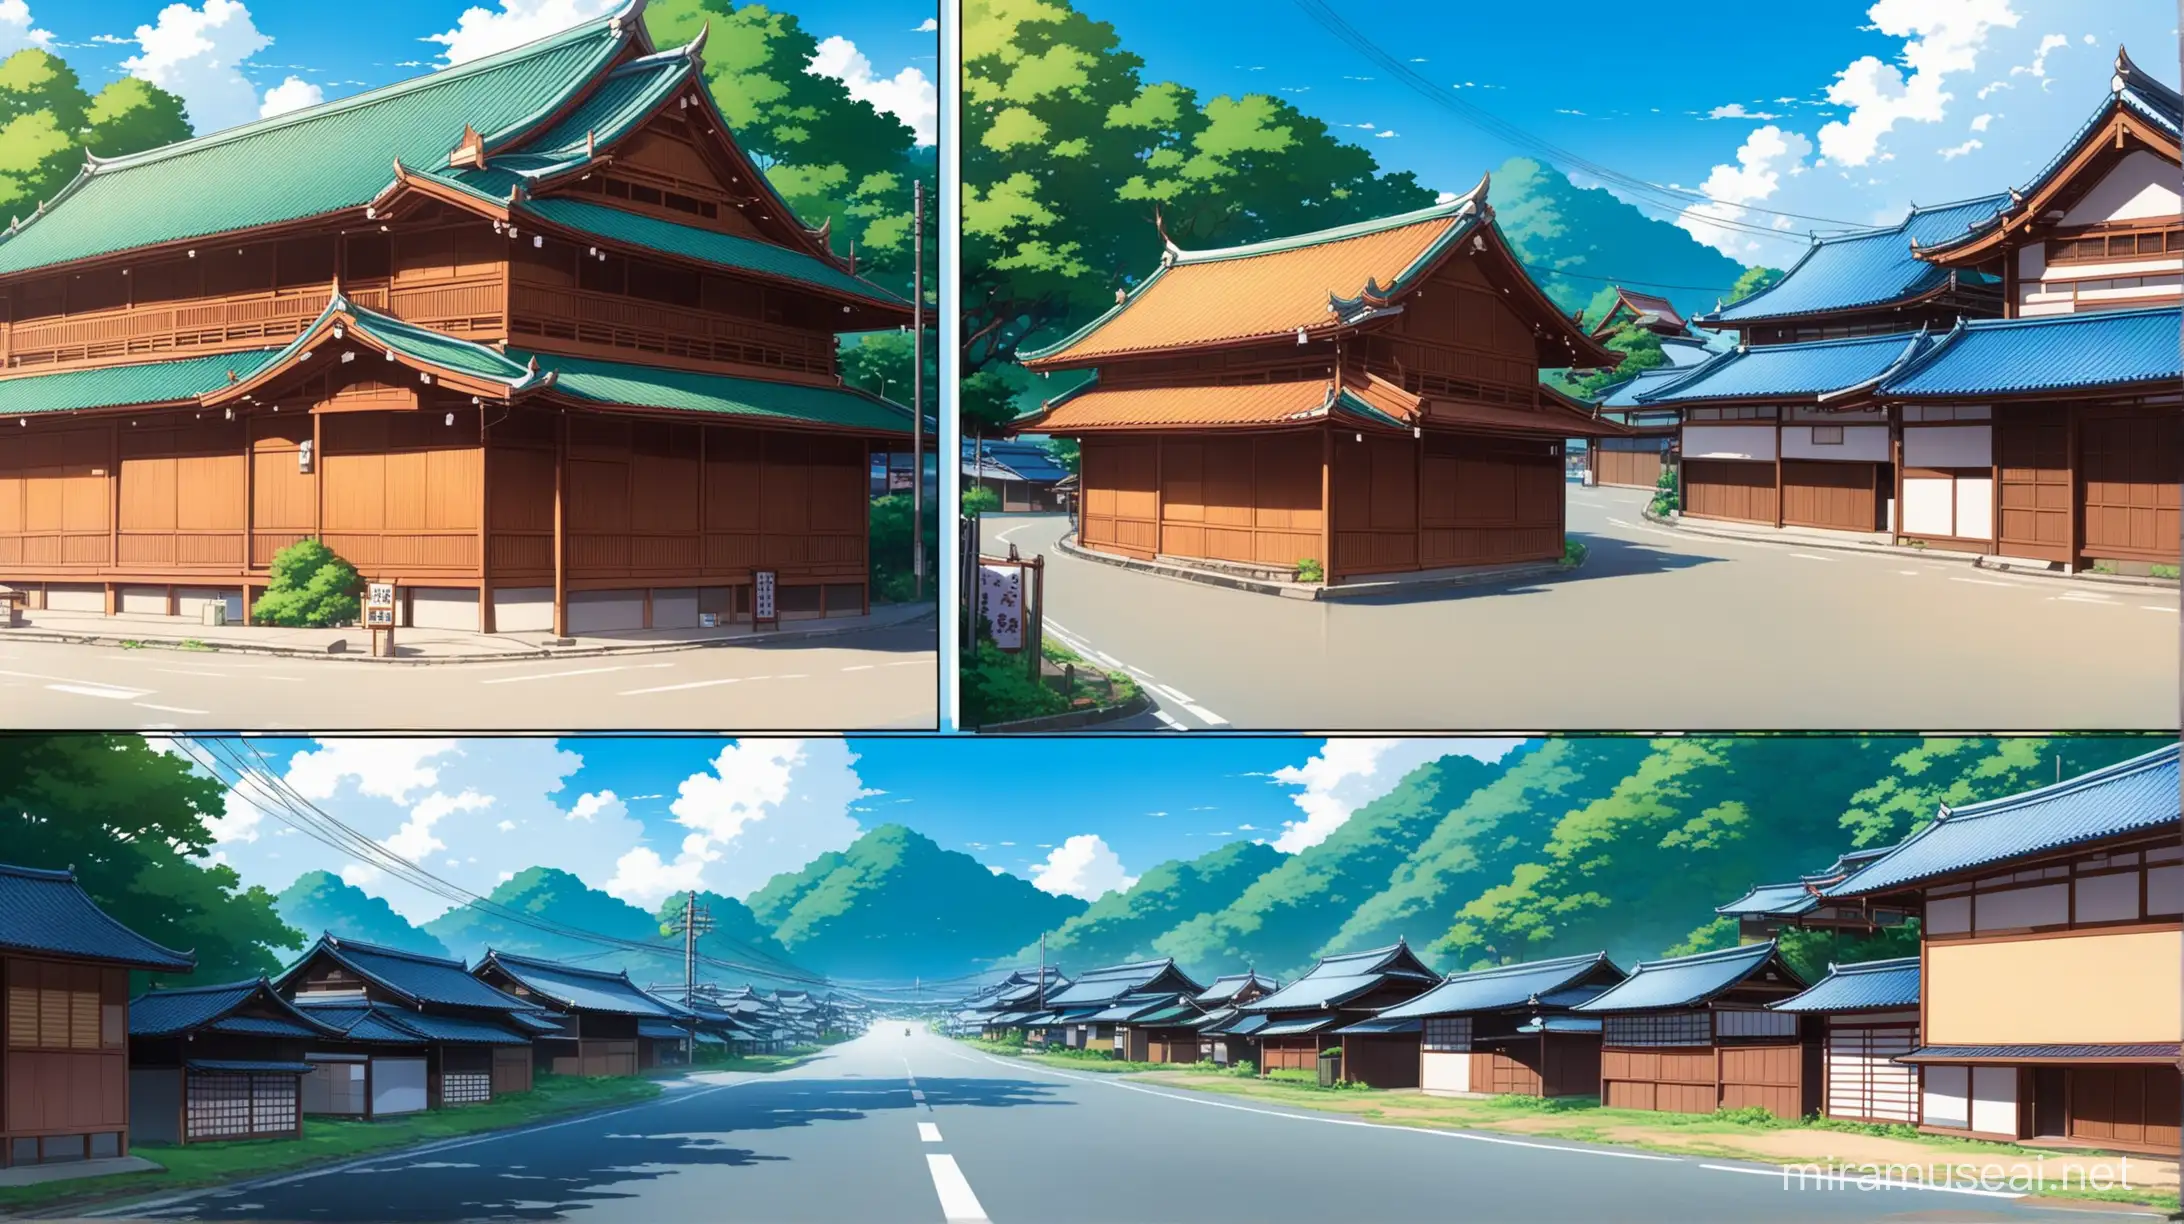 The picture on the left is a market in Thailand. In the middle is a road. The picture on the right is a house in Japan. anime style